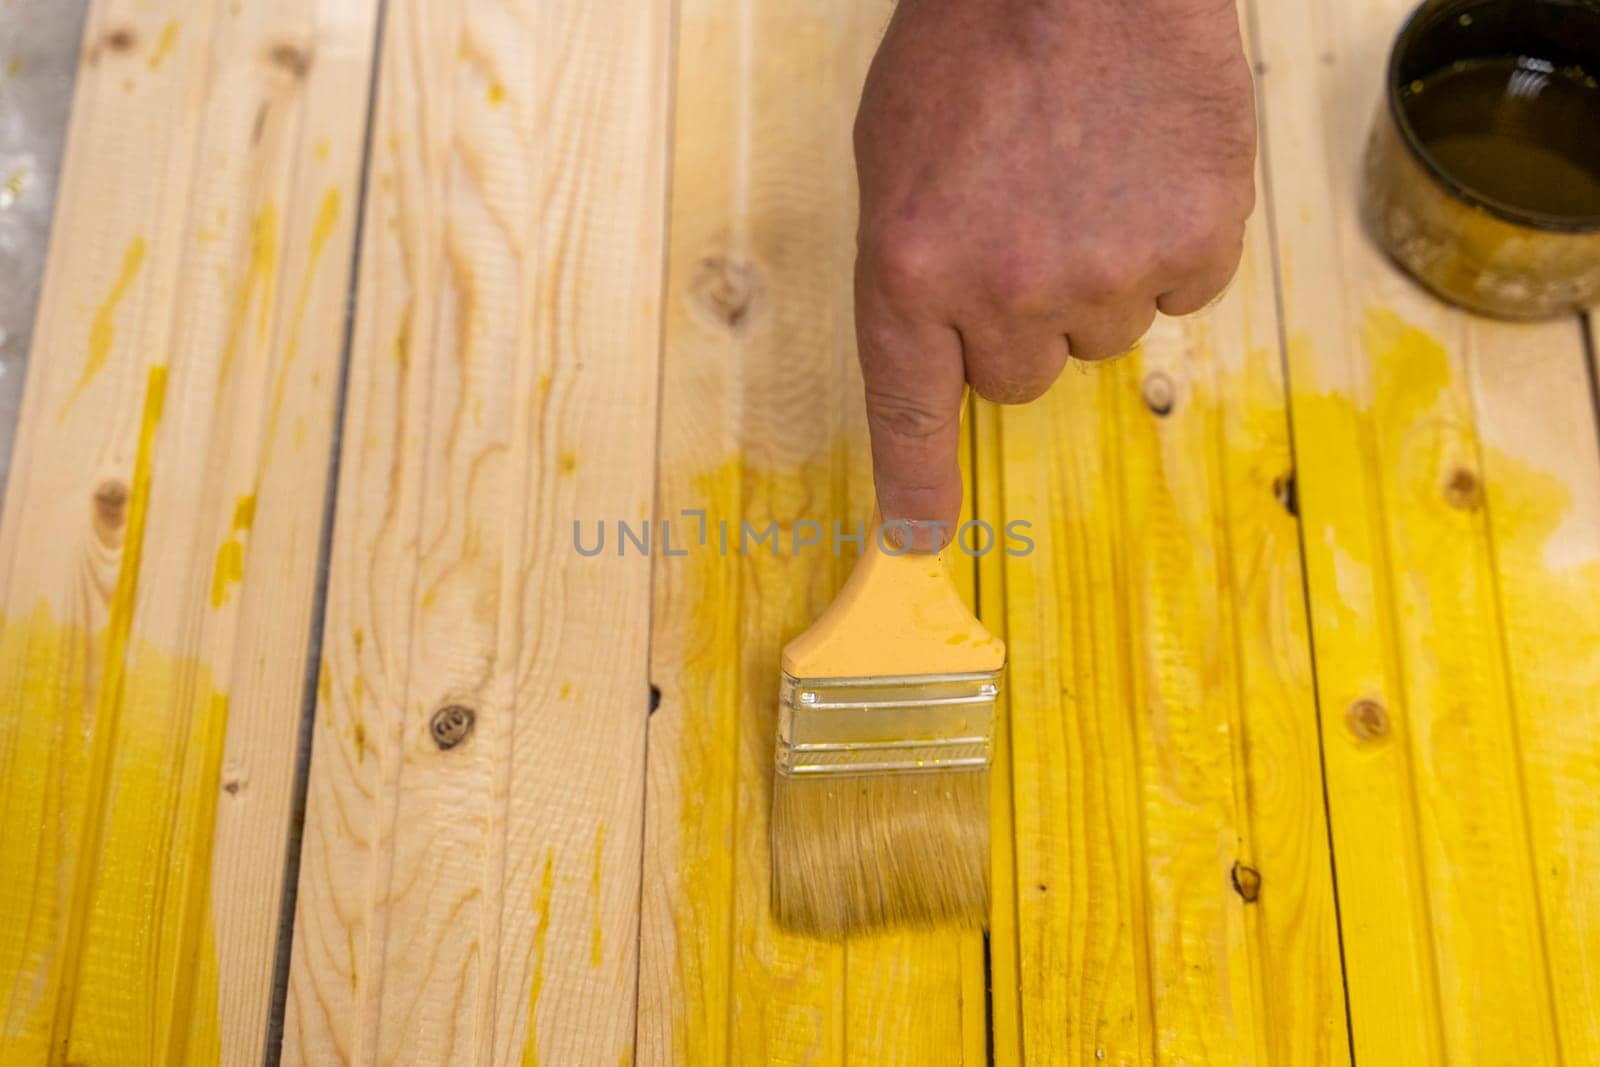 applying the protective composition on the board with a brush. treatment of wood from rotting. the master paints wooden boards.